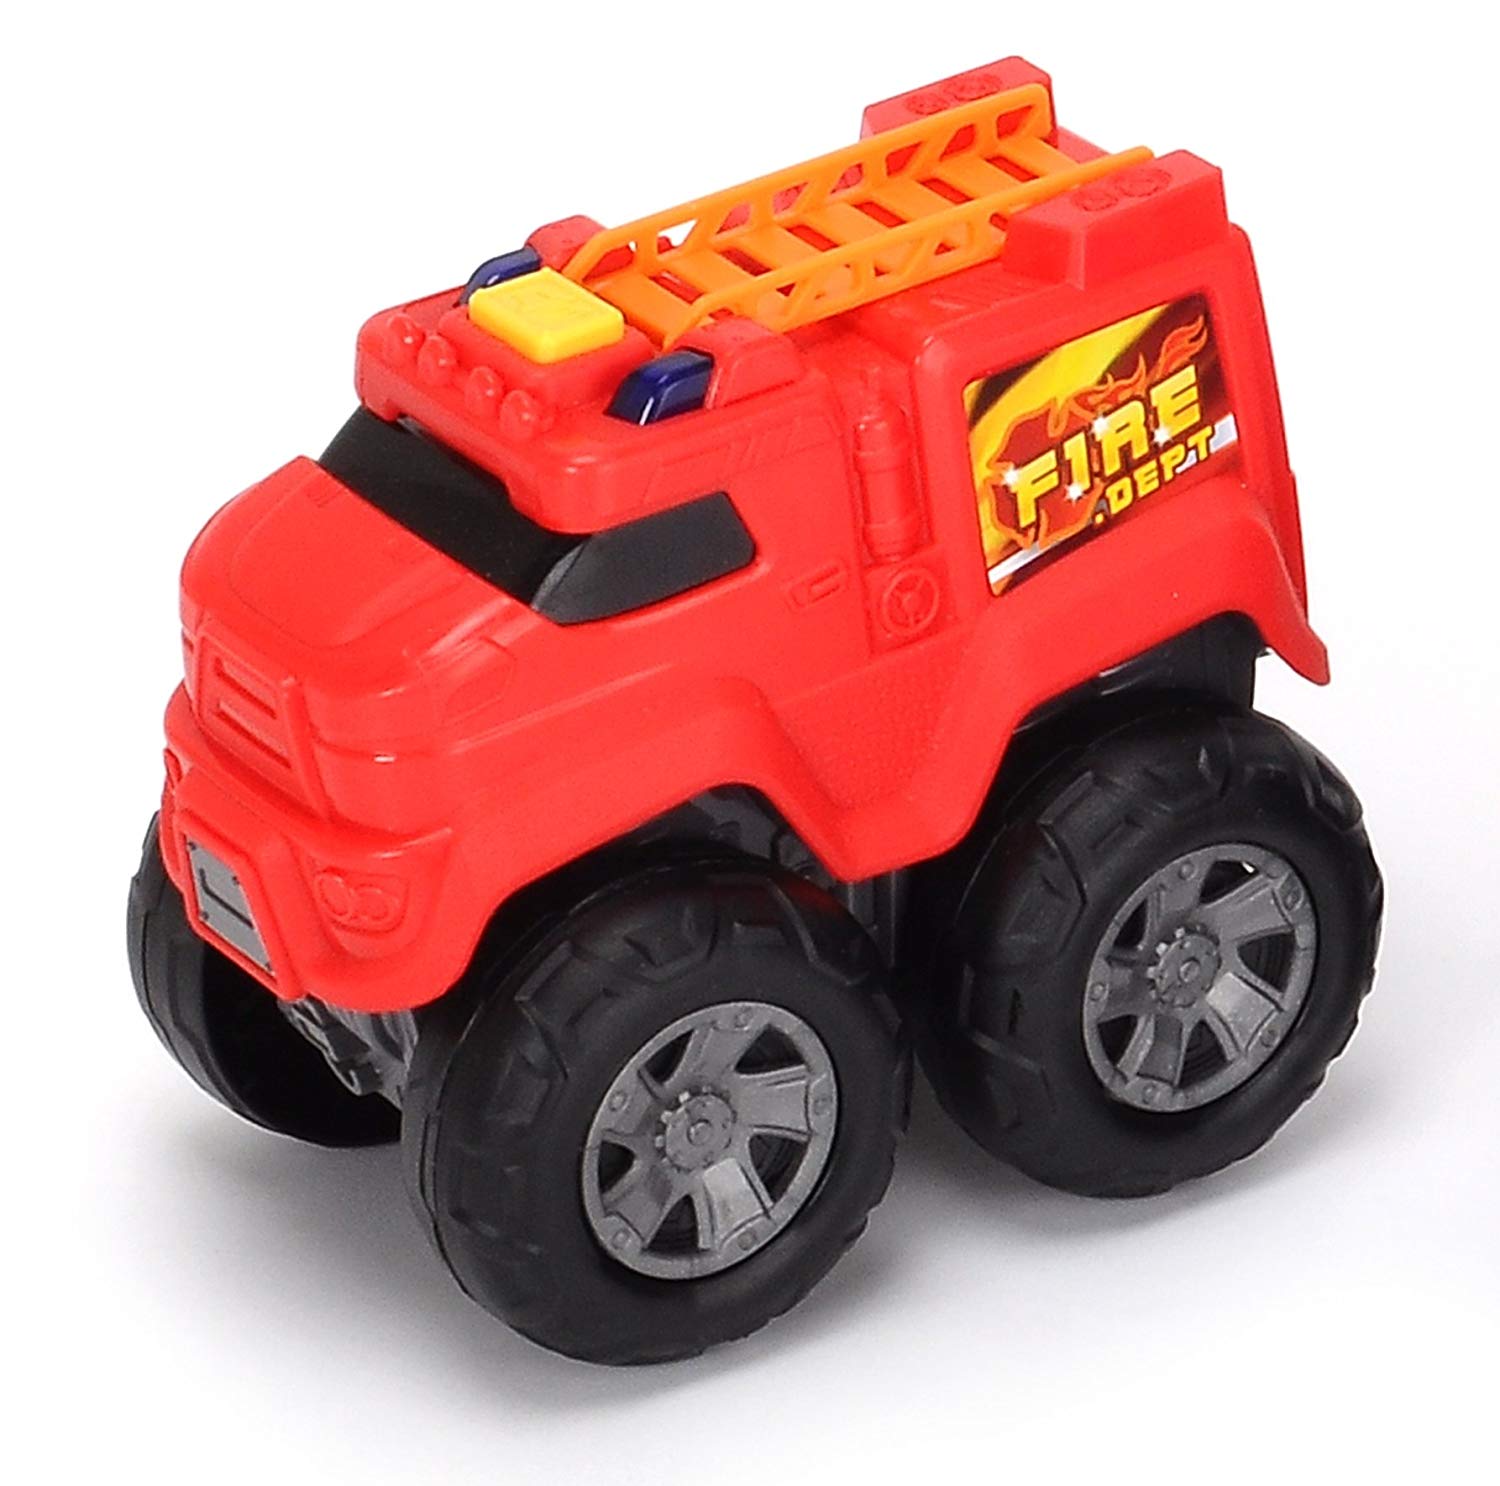 Dickie-Spielzeug 203301000 - Monster Truck - Tough Wheelers, Green/Red/Blue